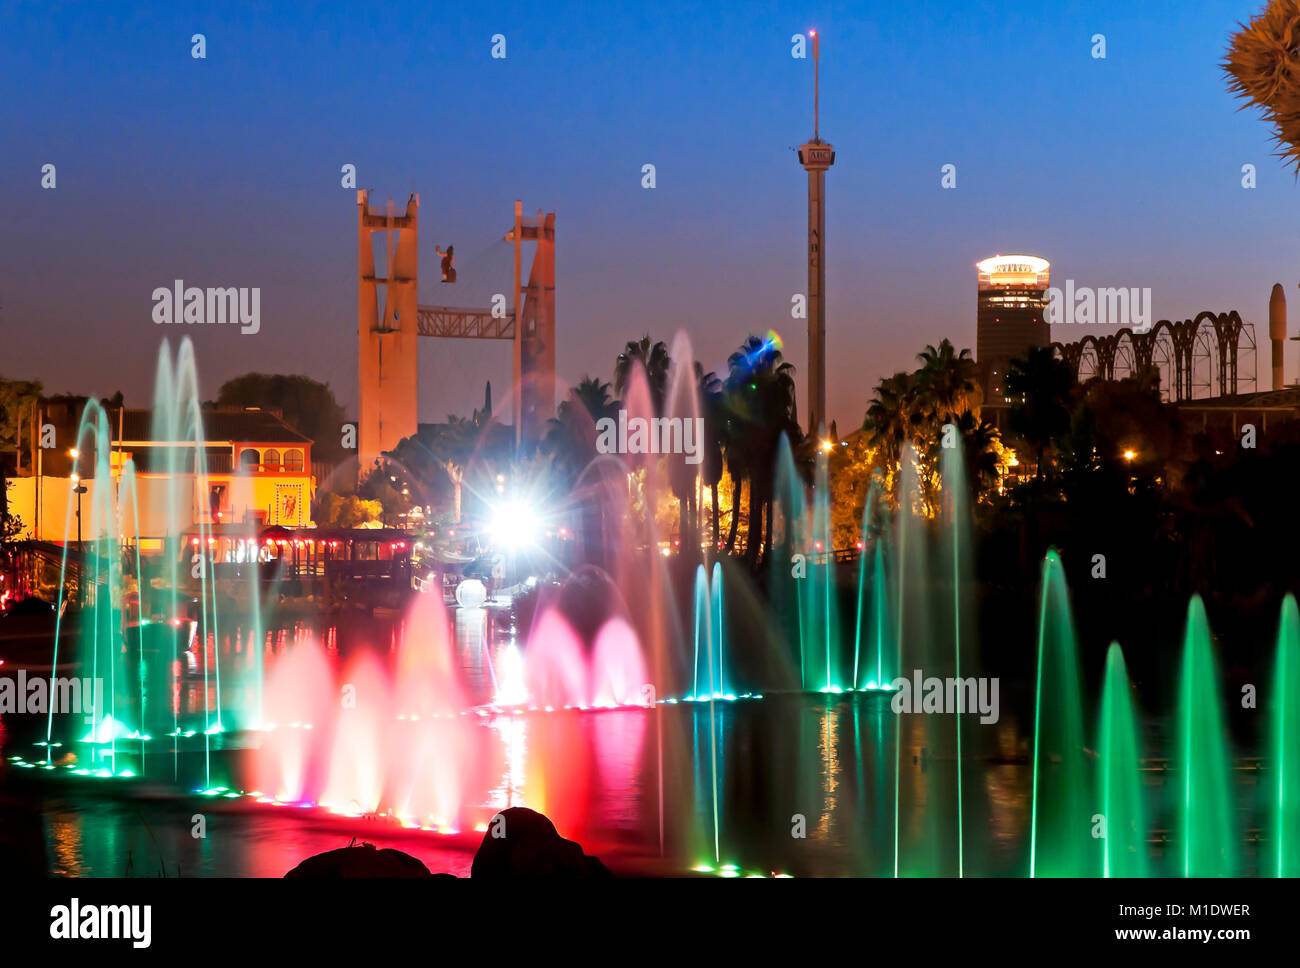 Isla Magica (Magic Island) Theme Park, Lake with water jets at dusk, Seville, Region of Andalusia, Spain, Europe Stock Photo